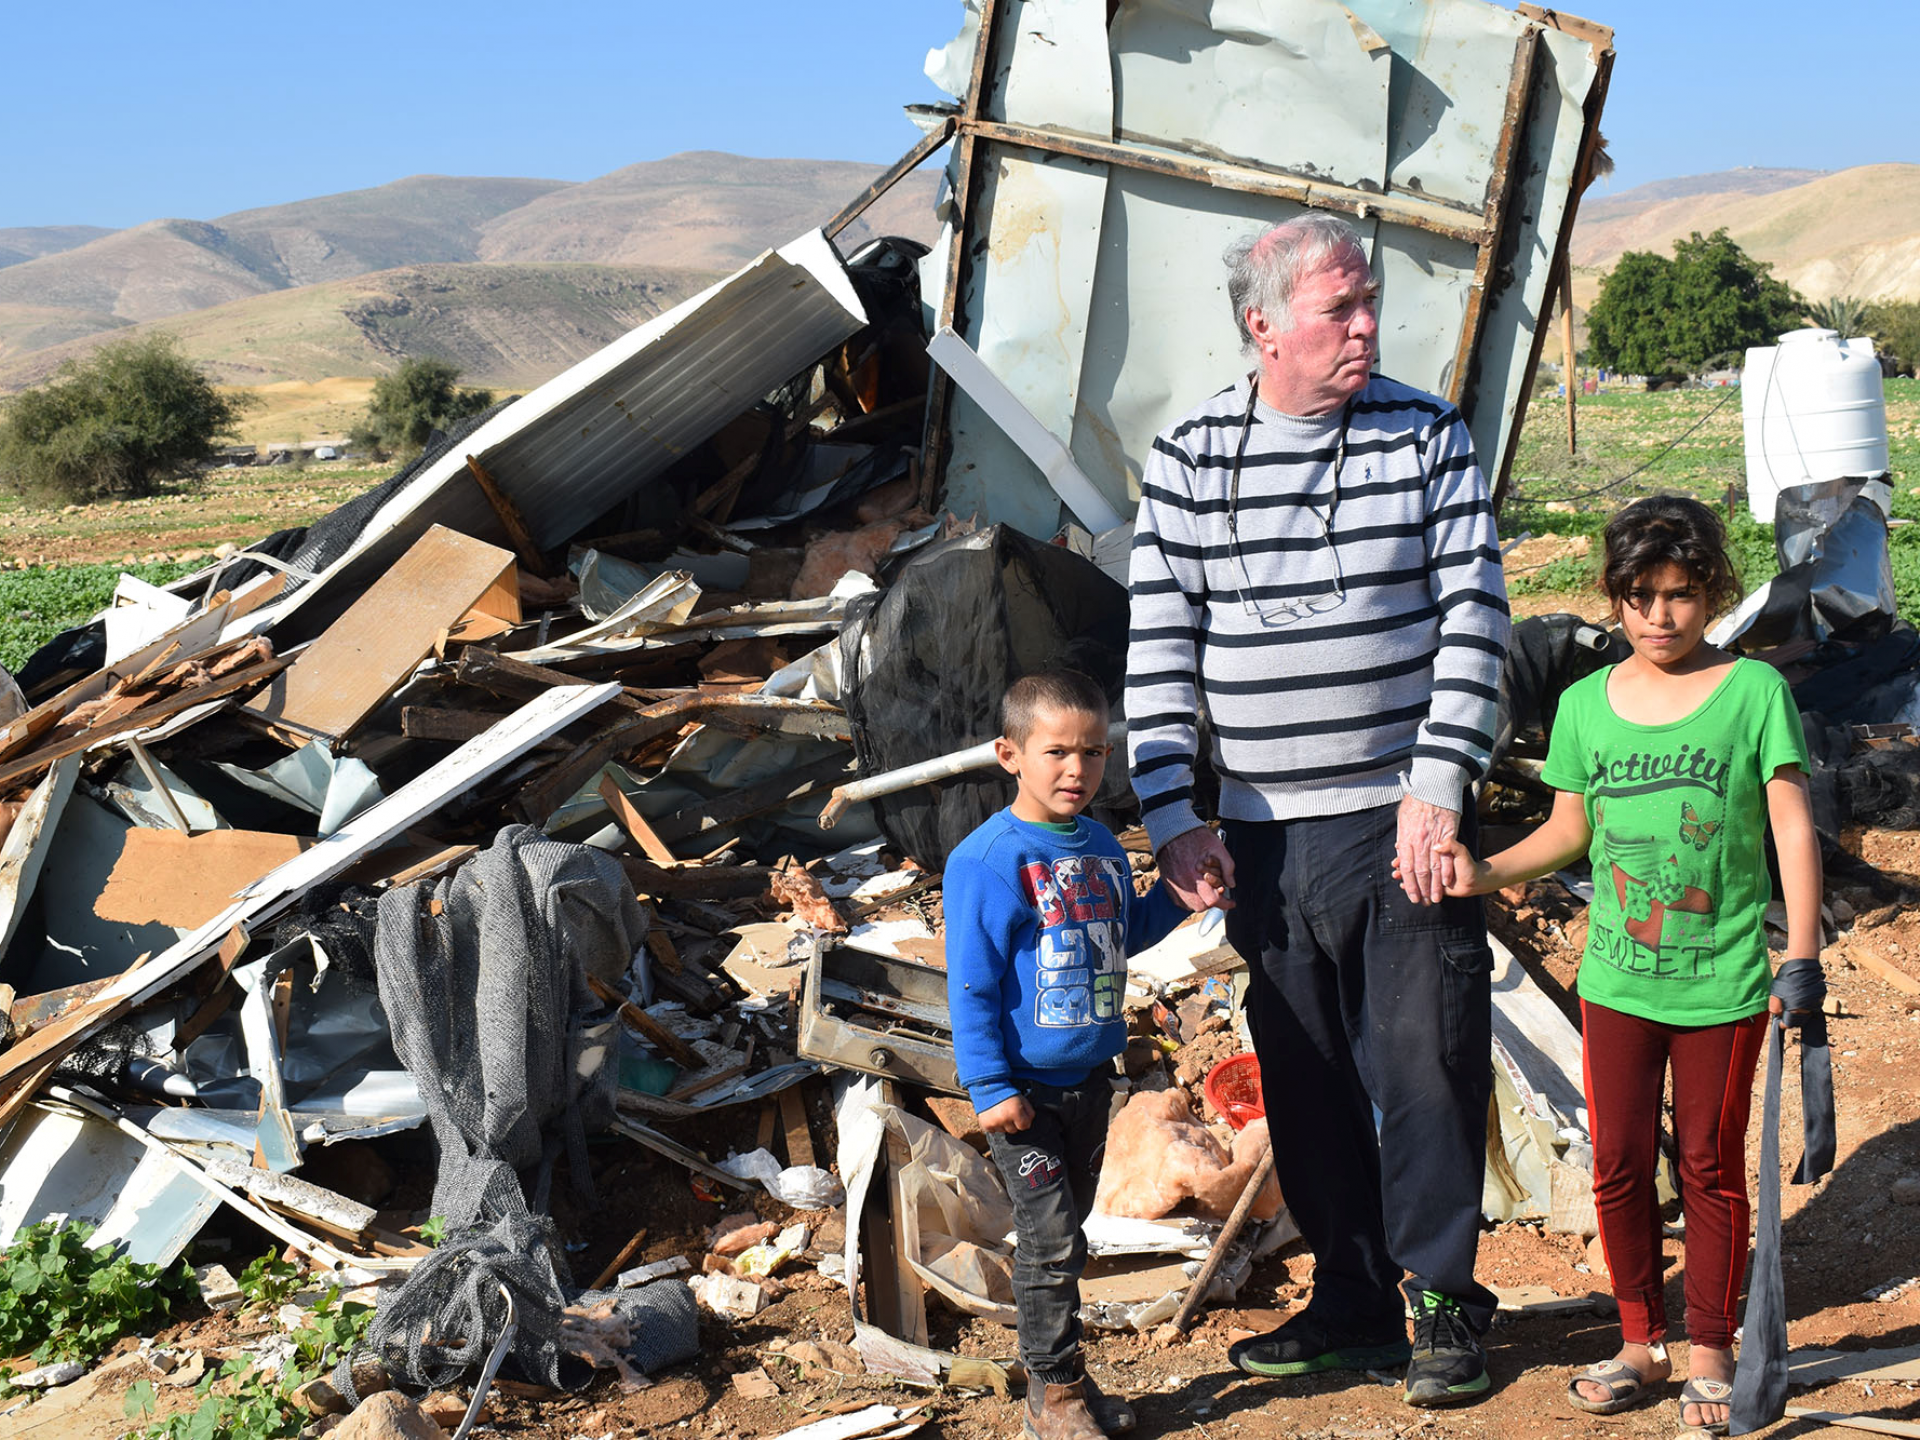 Buma Inbar and the family's children with the destroyed home in the background